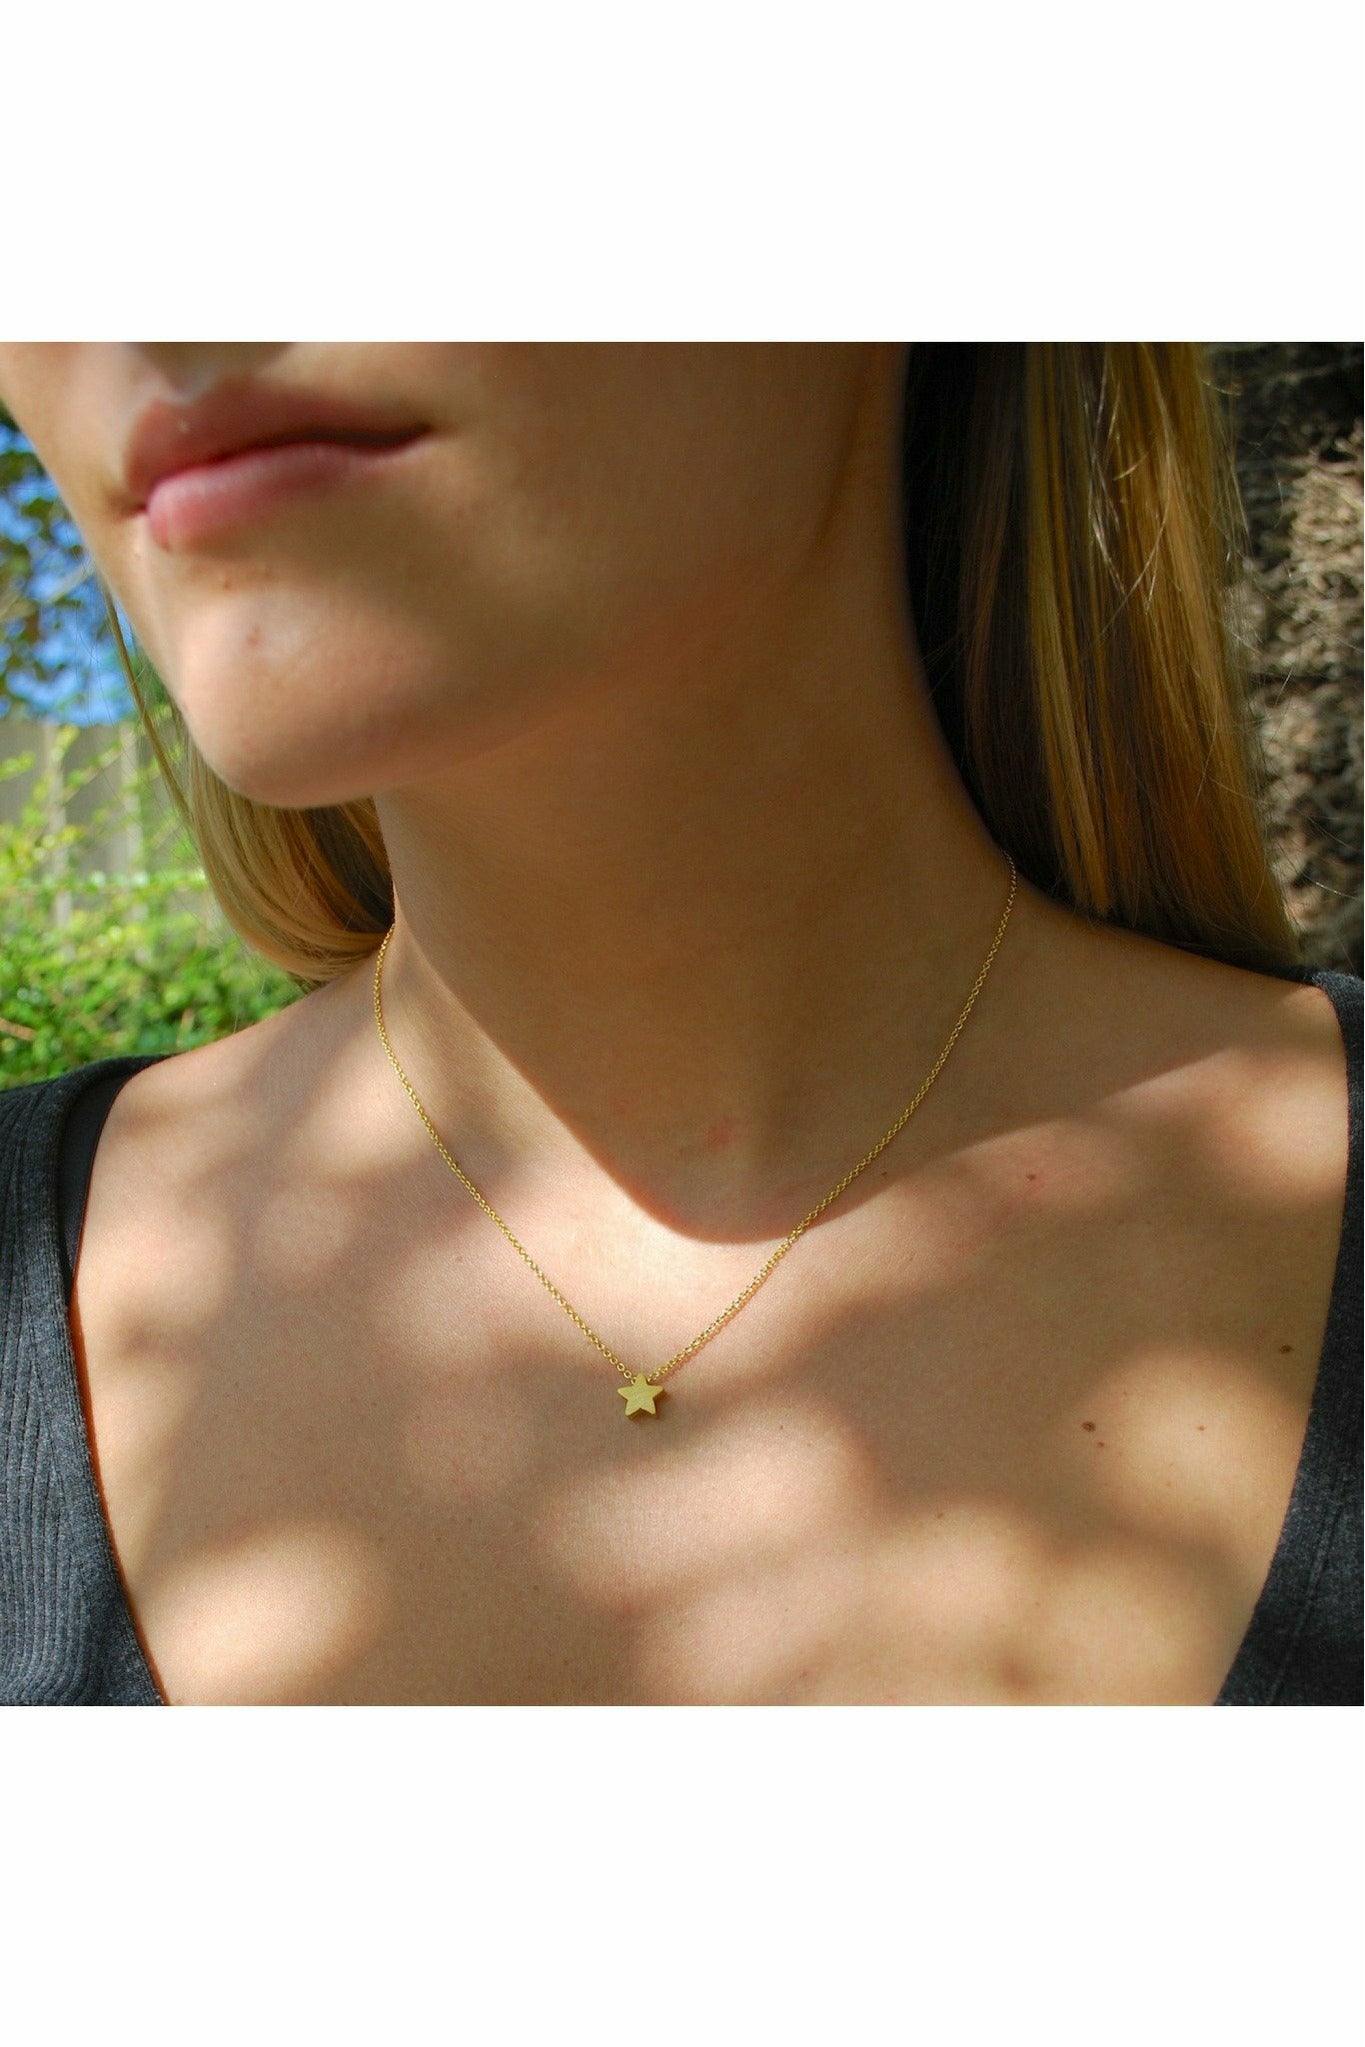 Star necklace in gold NLK15G